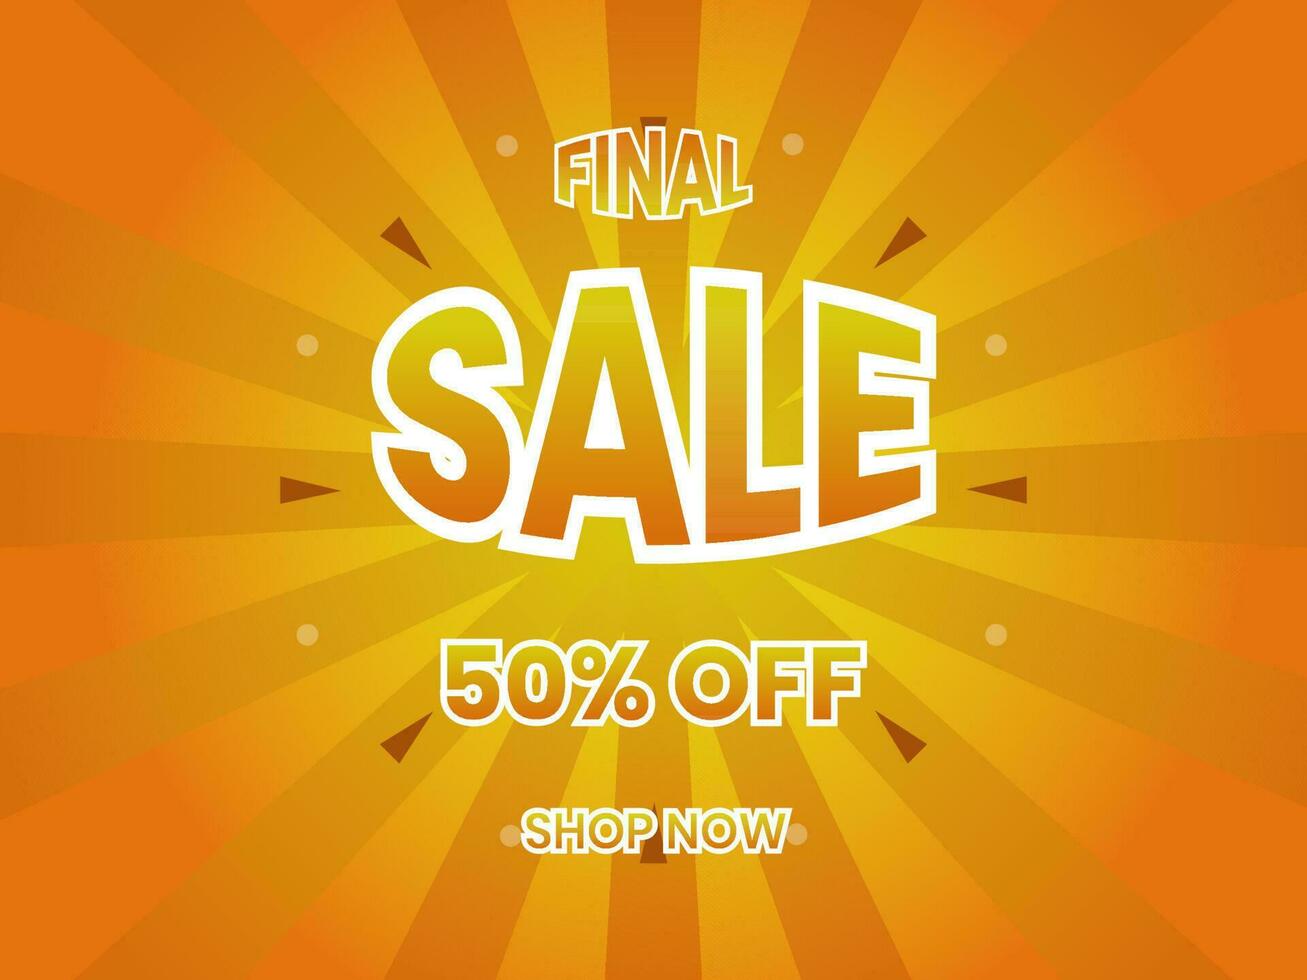 Final Sale Poster Design With Discount Offer On Orange Rays Background. vector